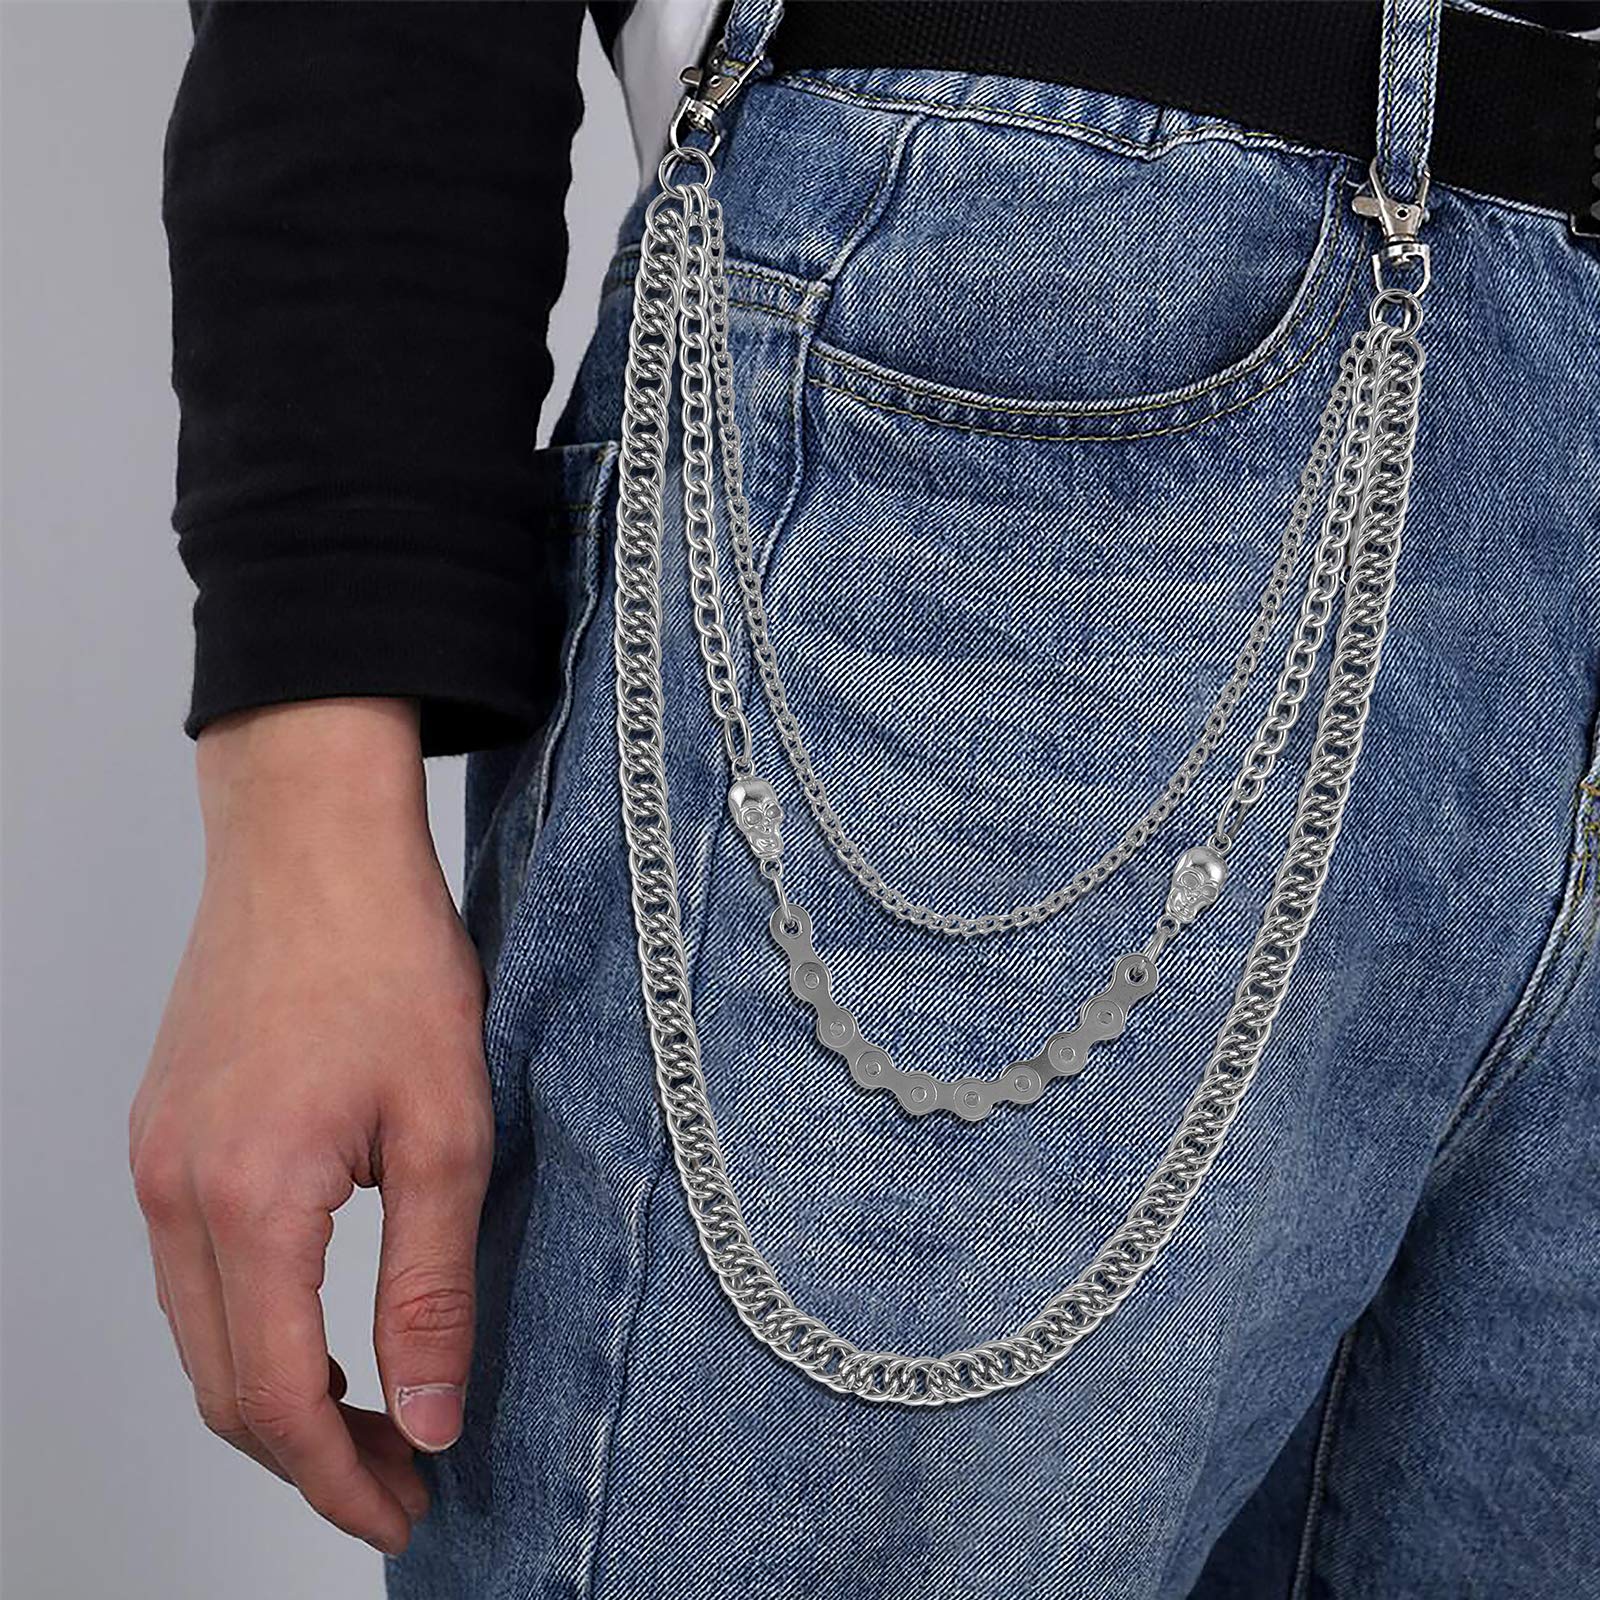 Jeans Chains Wallet Chain Pants Chain, Silver Pocket Chain Skull Chains Hip Hop Rock Chains Punk Gothic Metal Belt Chain Biker Trouser Chain Accessory Jewelry Gift for Men/Women